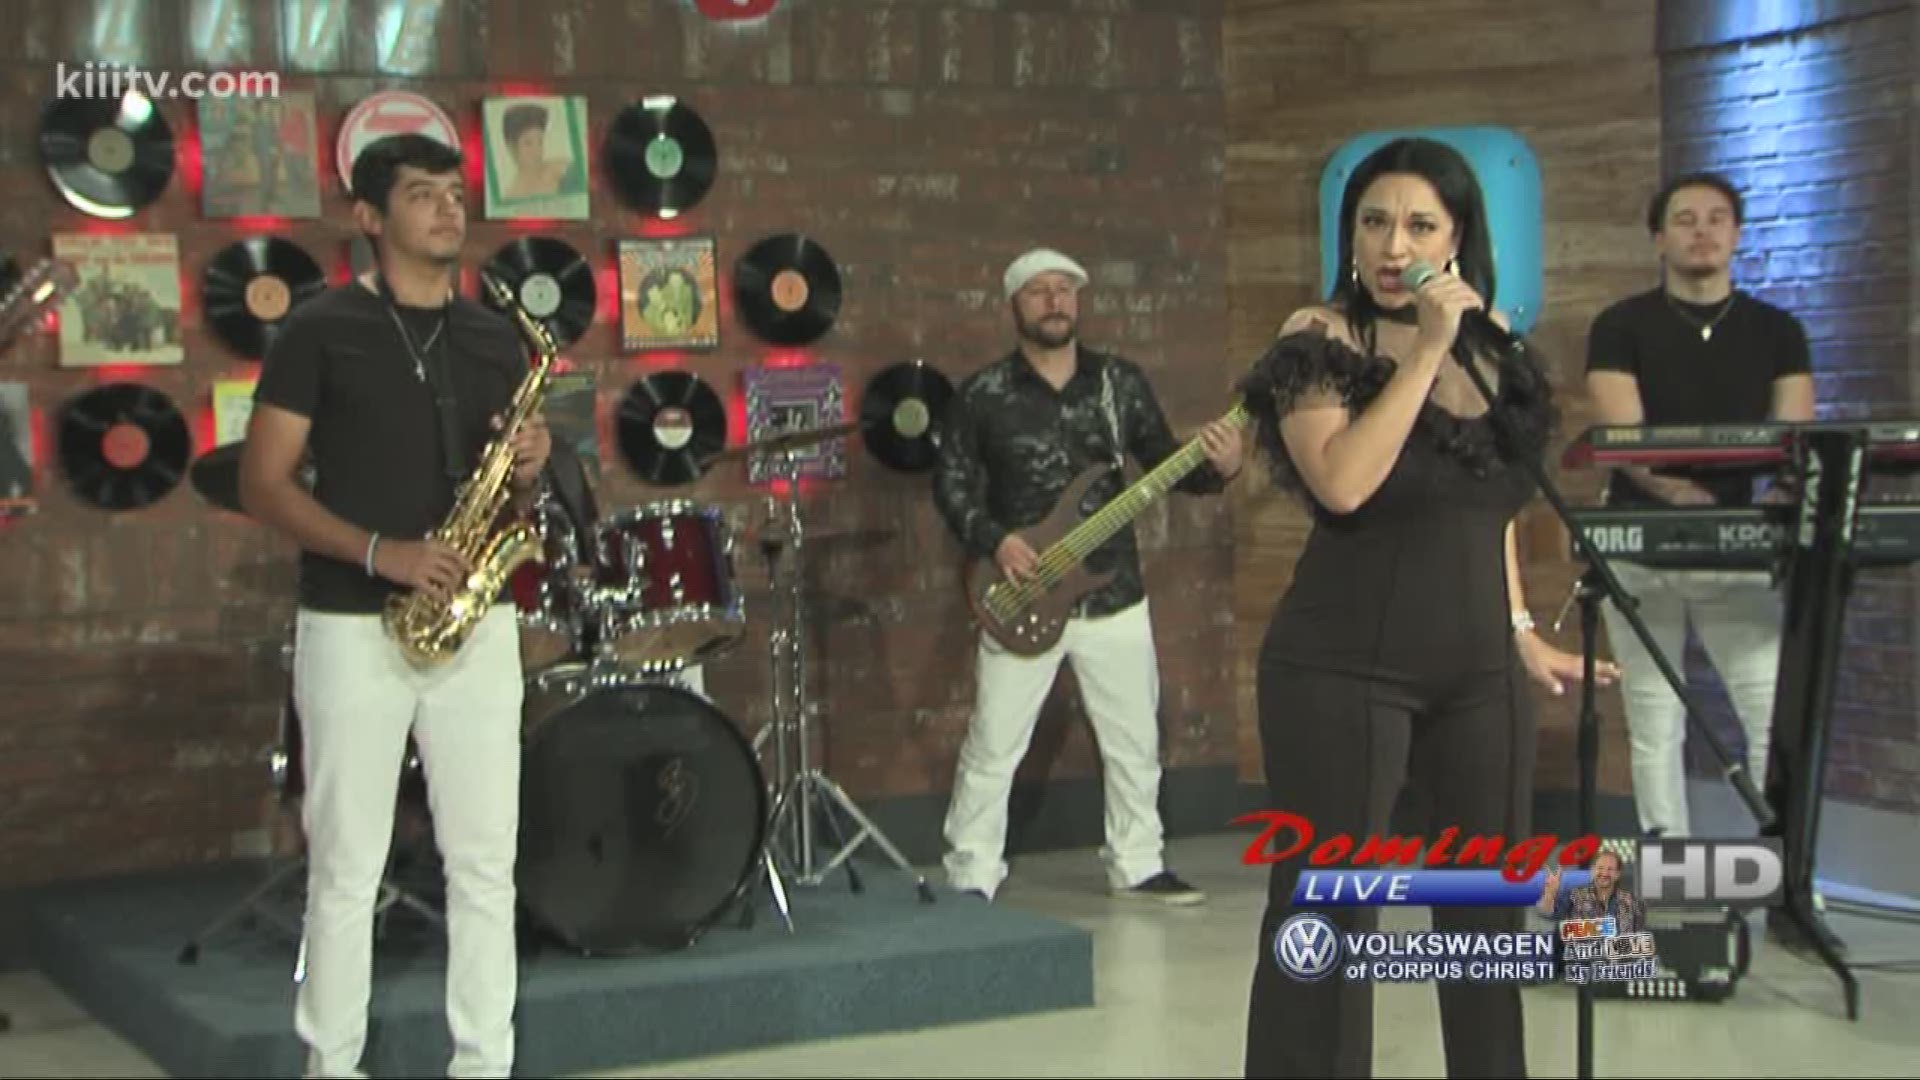 Anjelique And The Sweet City Band performing "La Otra" on Domingo Live